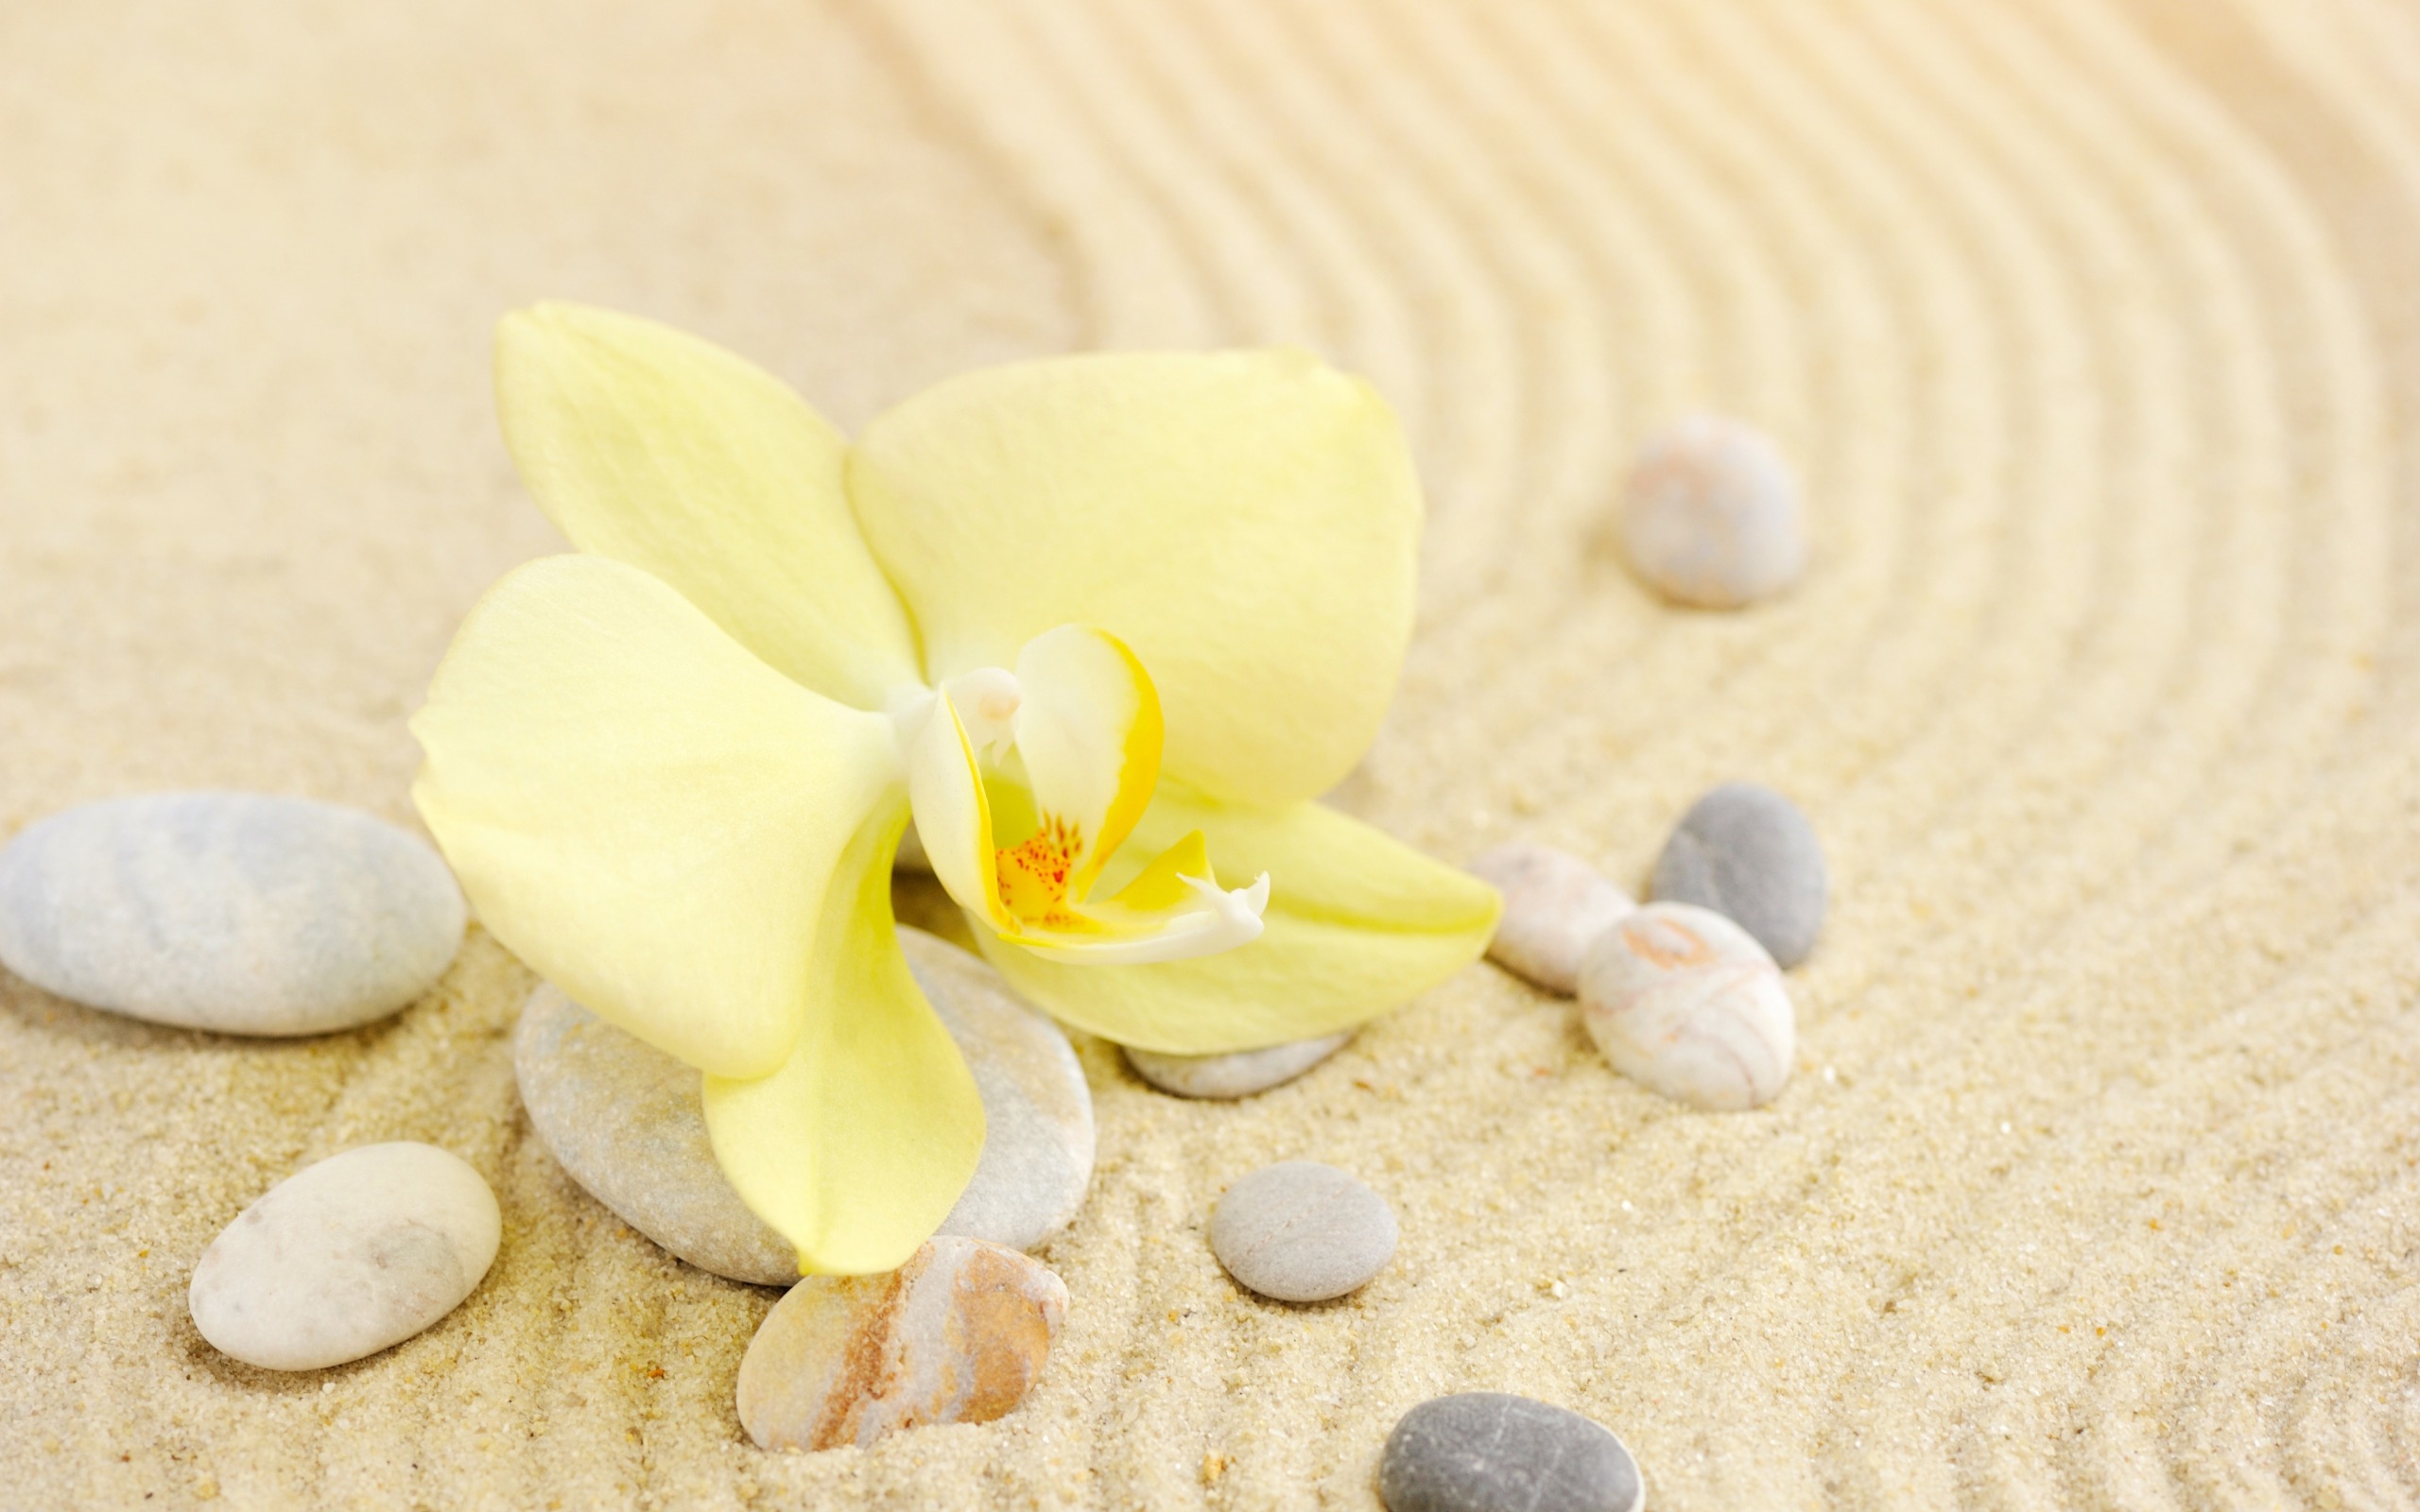 Yellow Orchid, Yellow Leaf, Sand, Spa, Stones, Seashells - Yellow Orchids - HD Wallpaper 